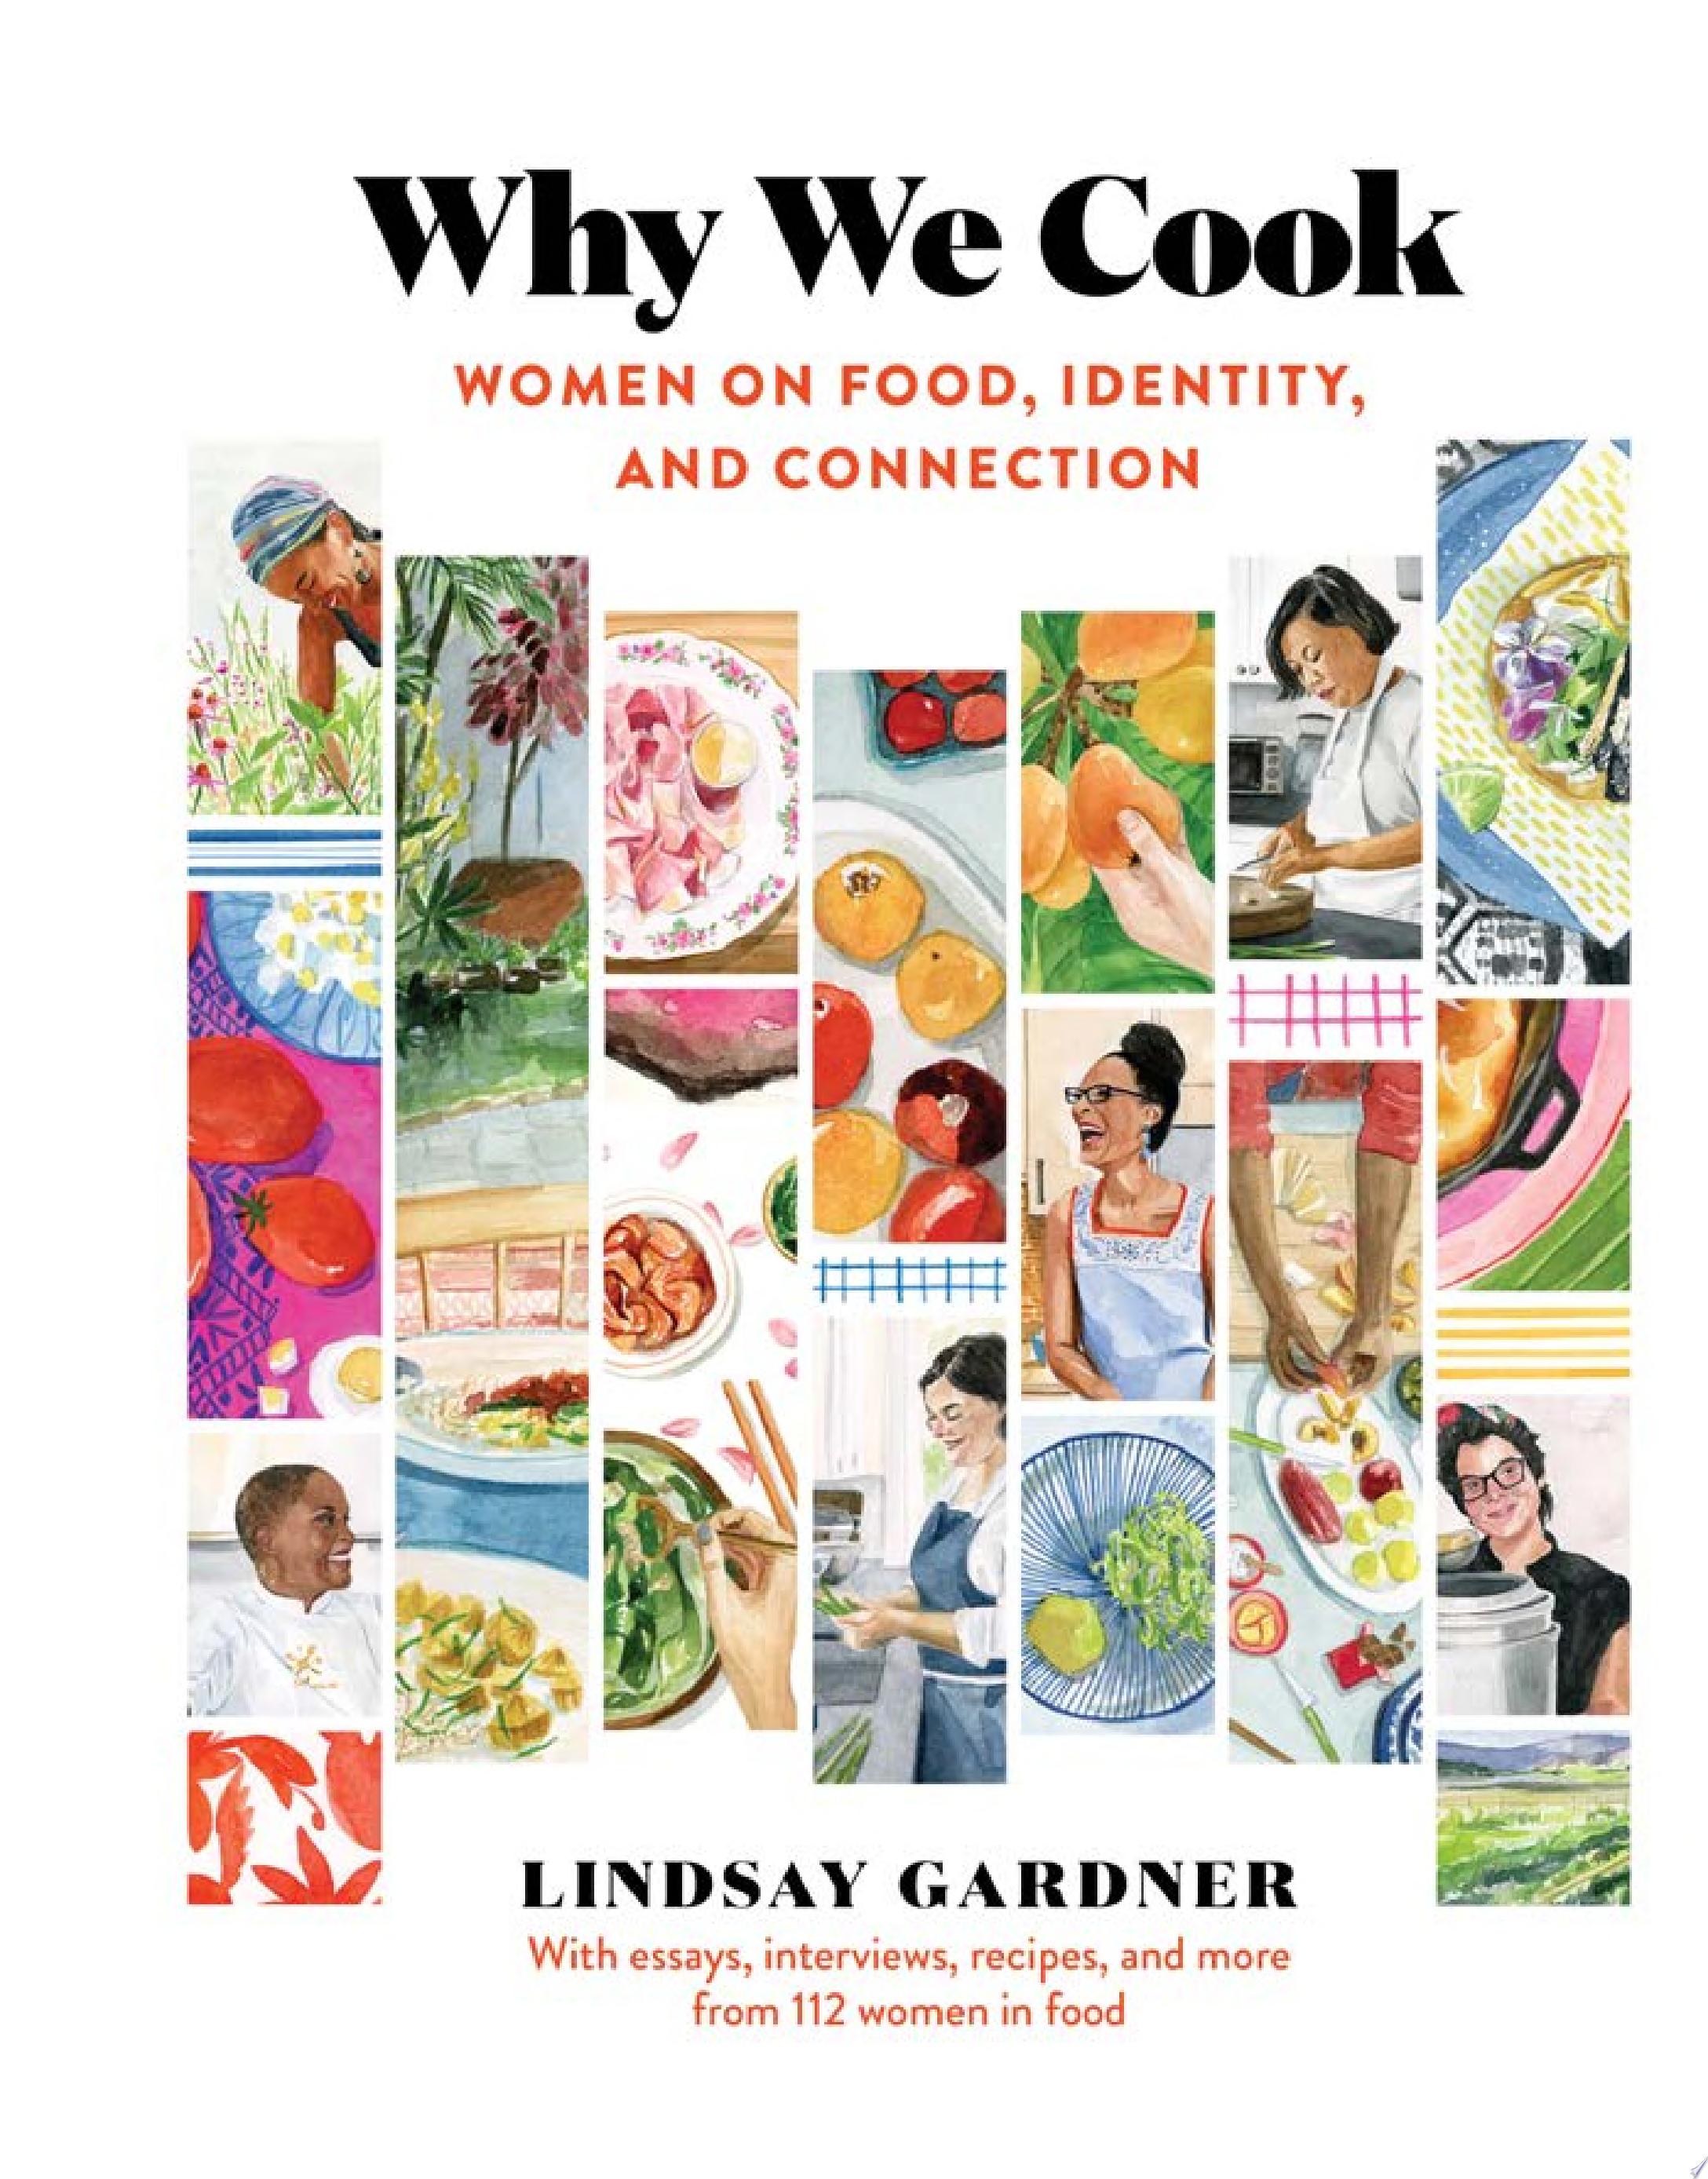 Image for "Why We Cook"